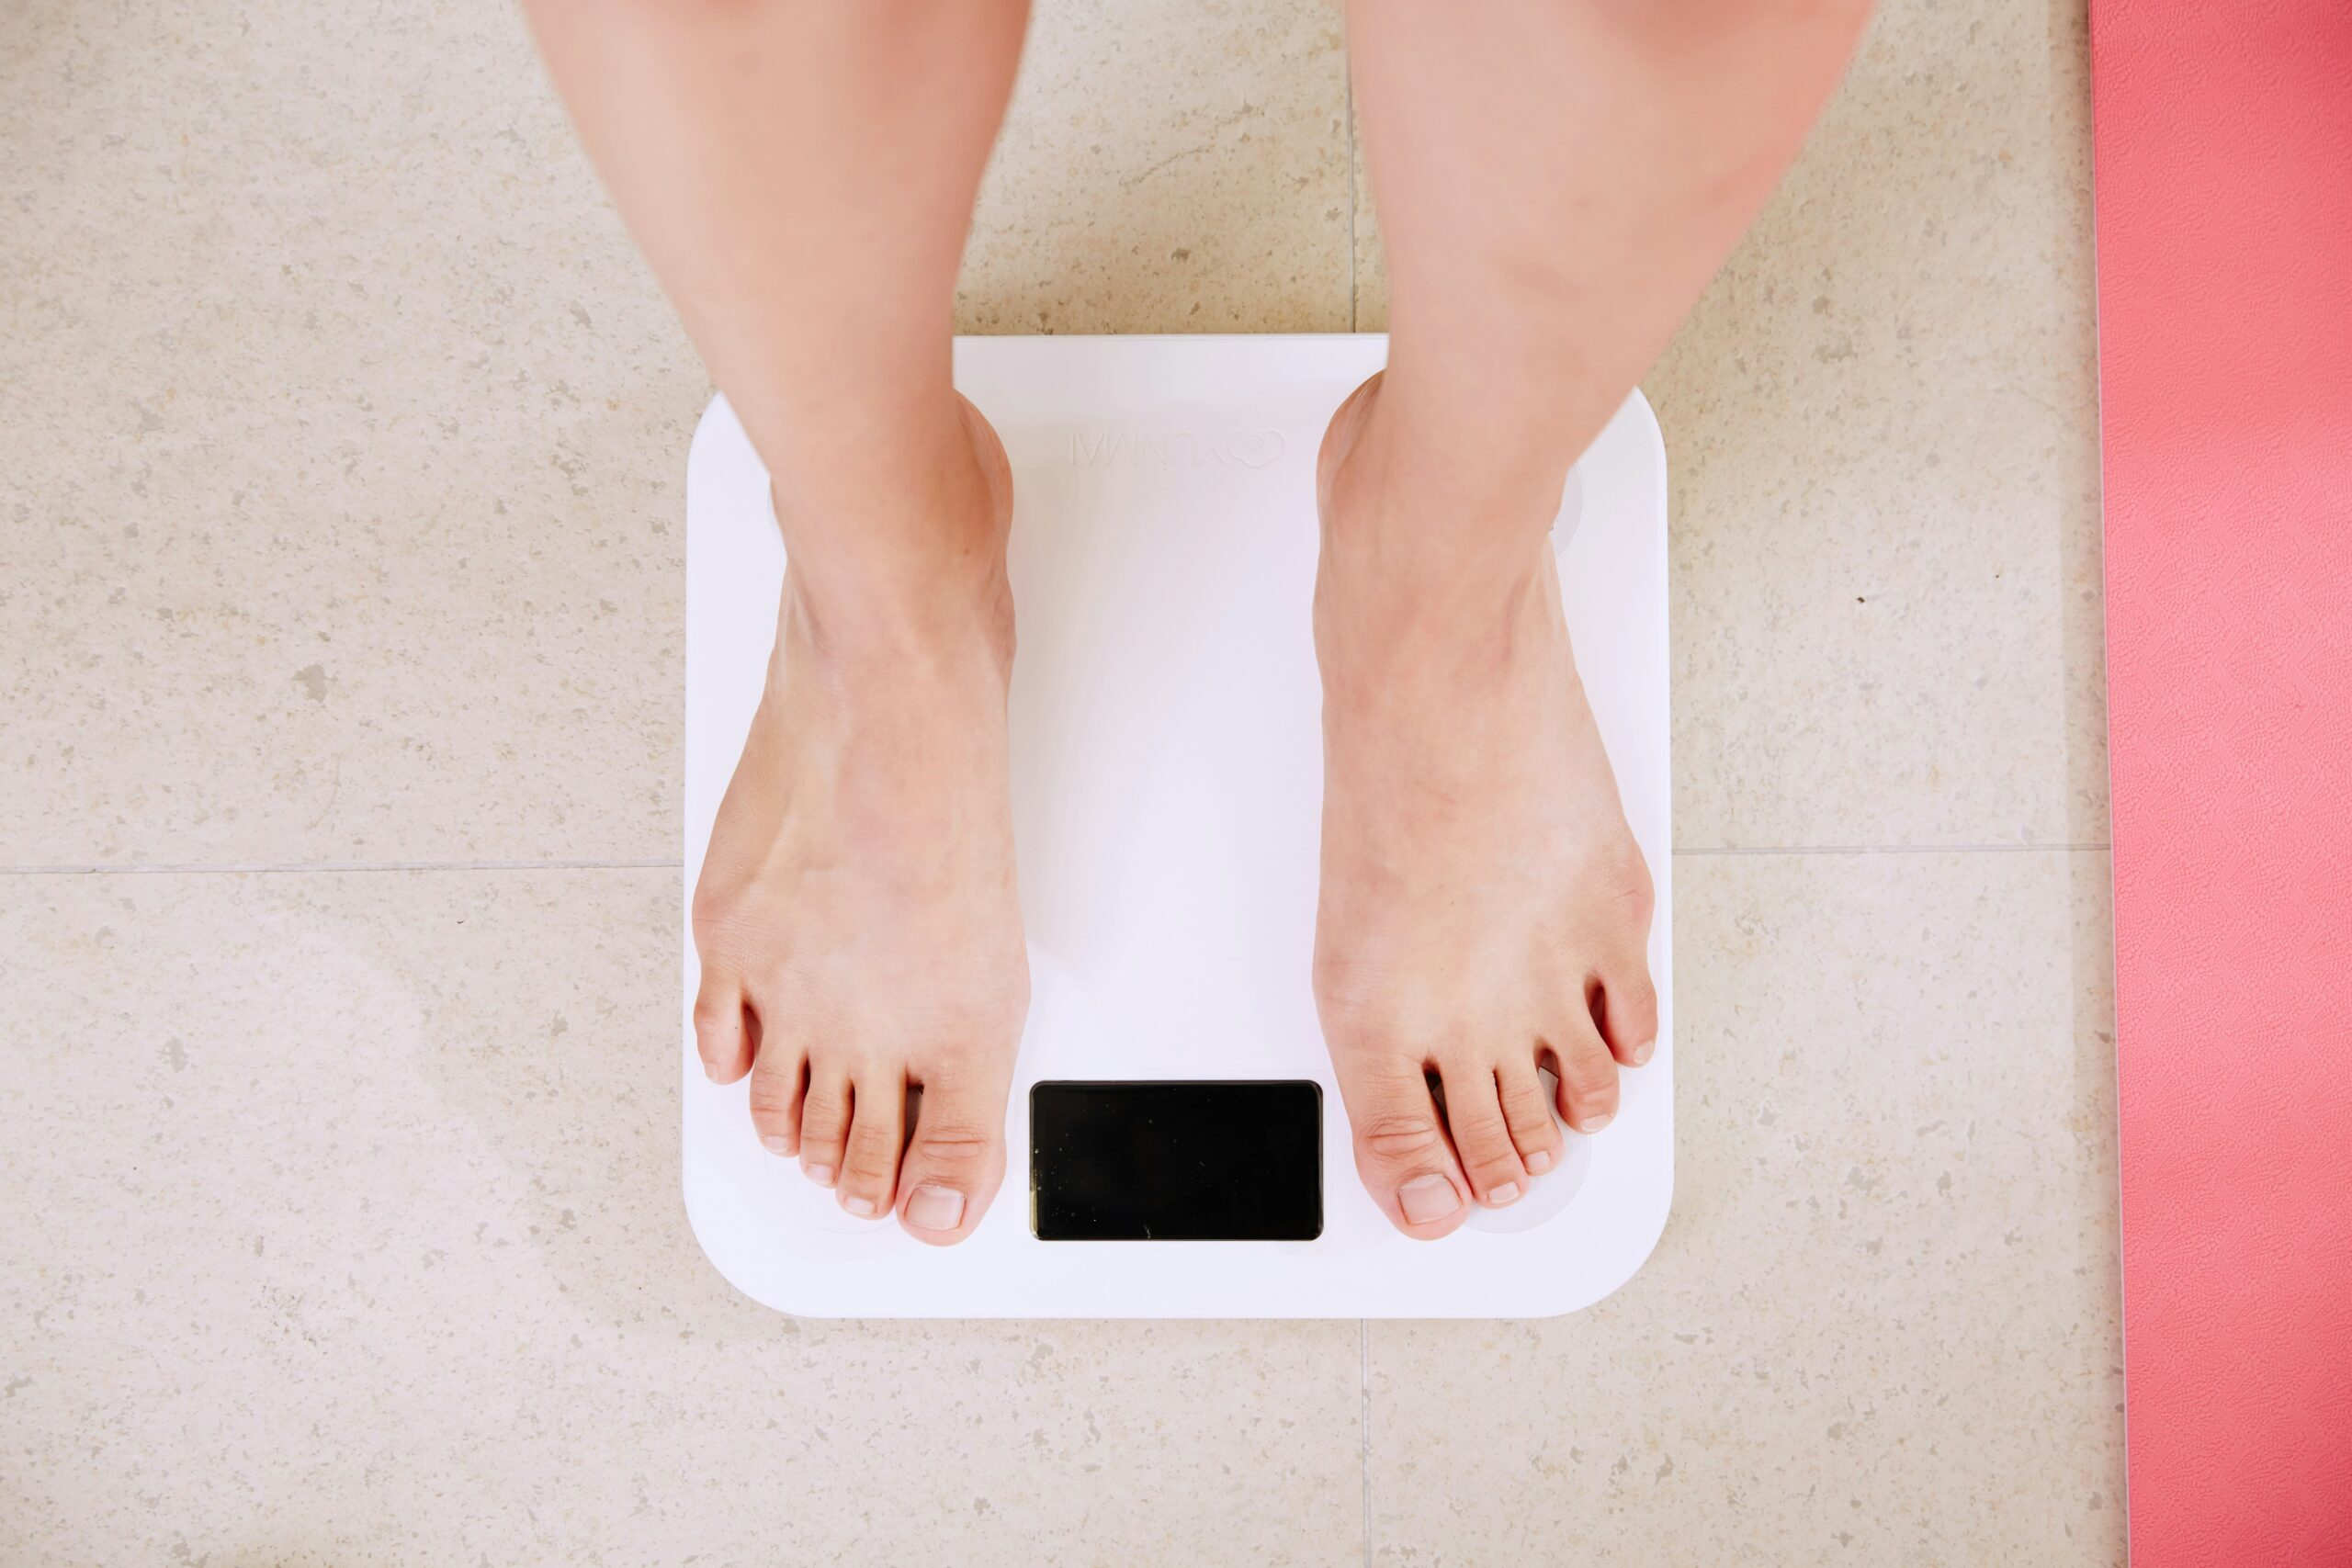 Lean Digital: How Apps and Services Can Help Control Weight